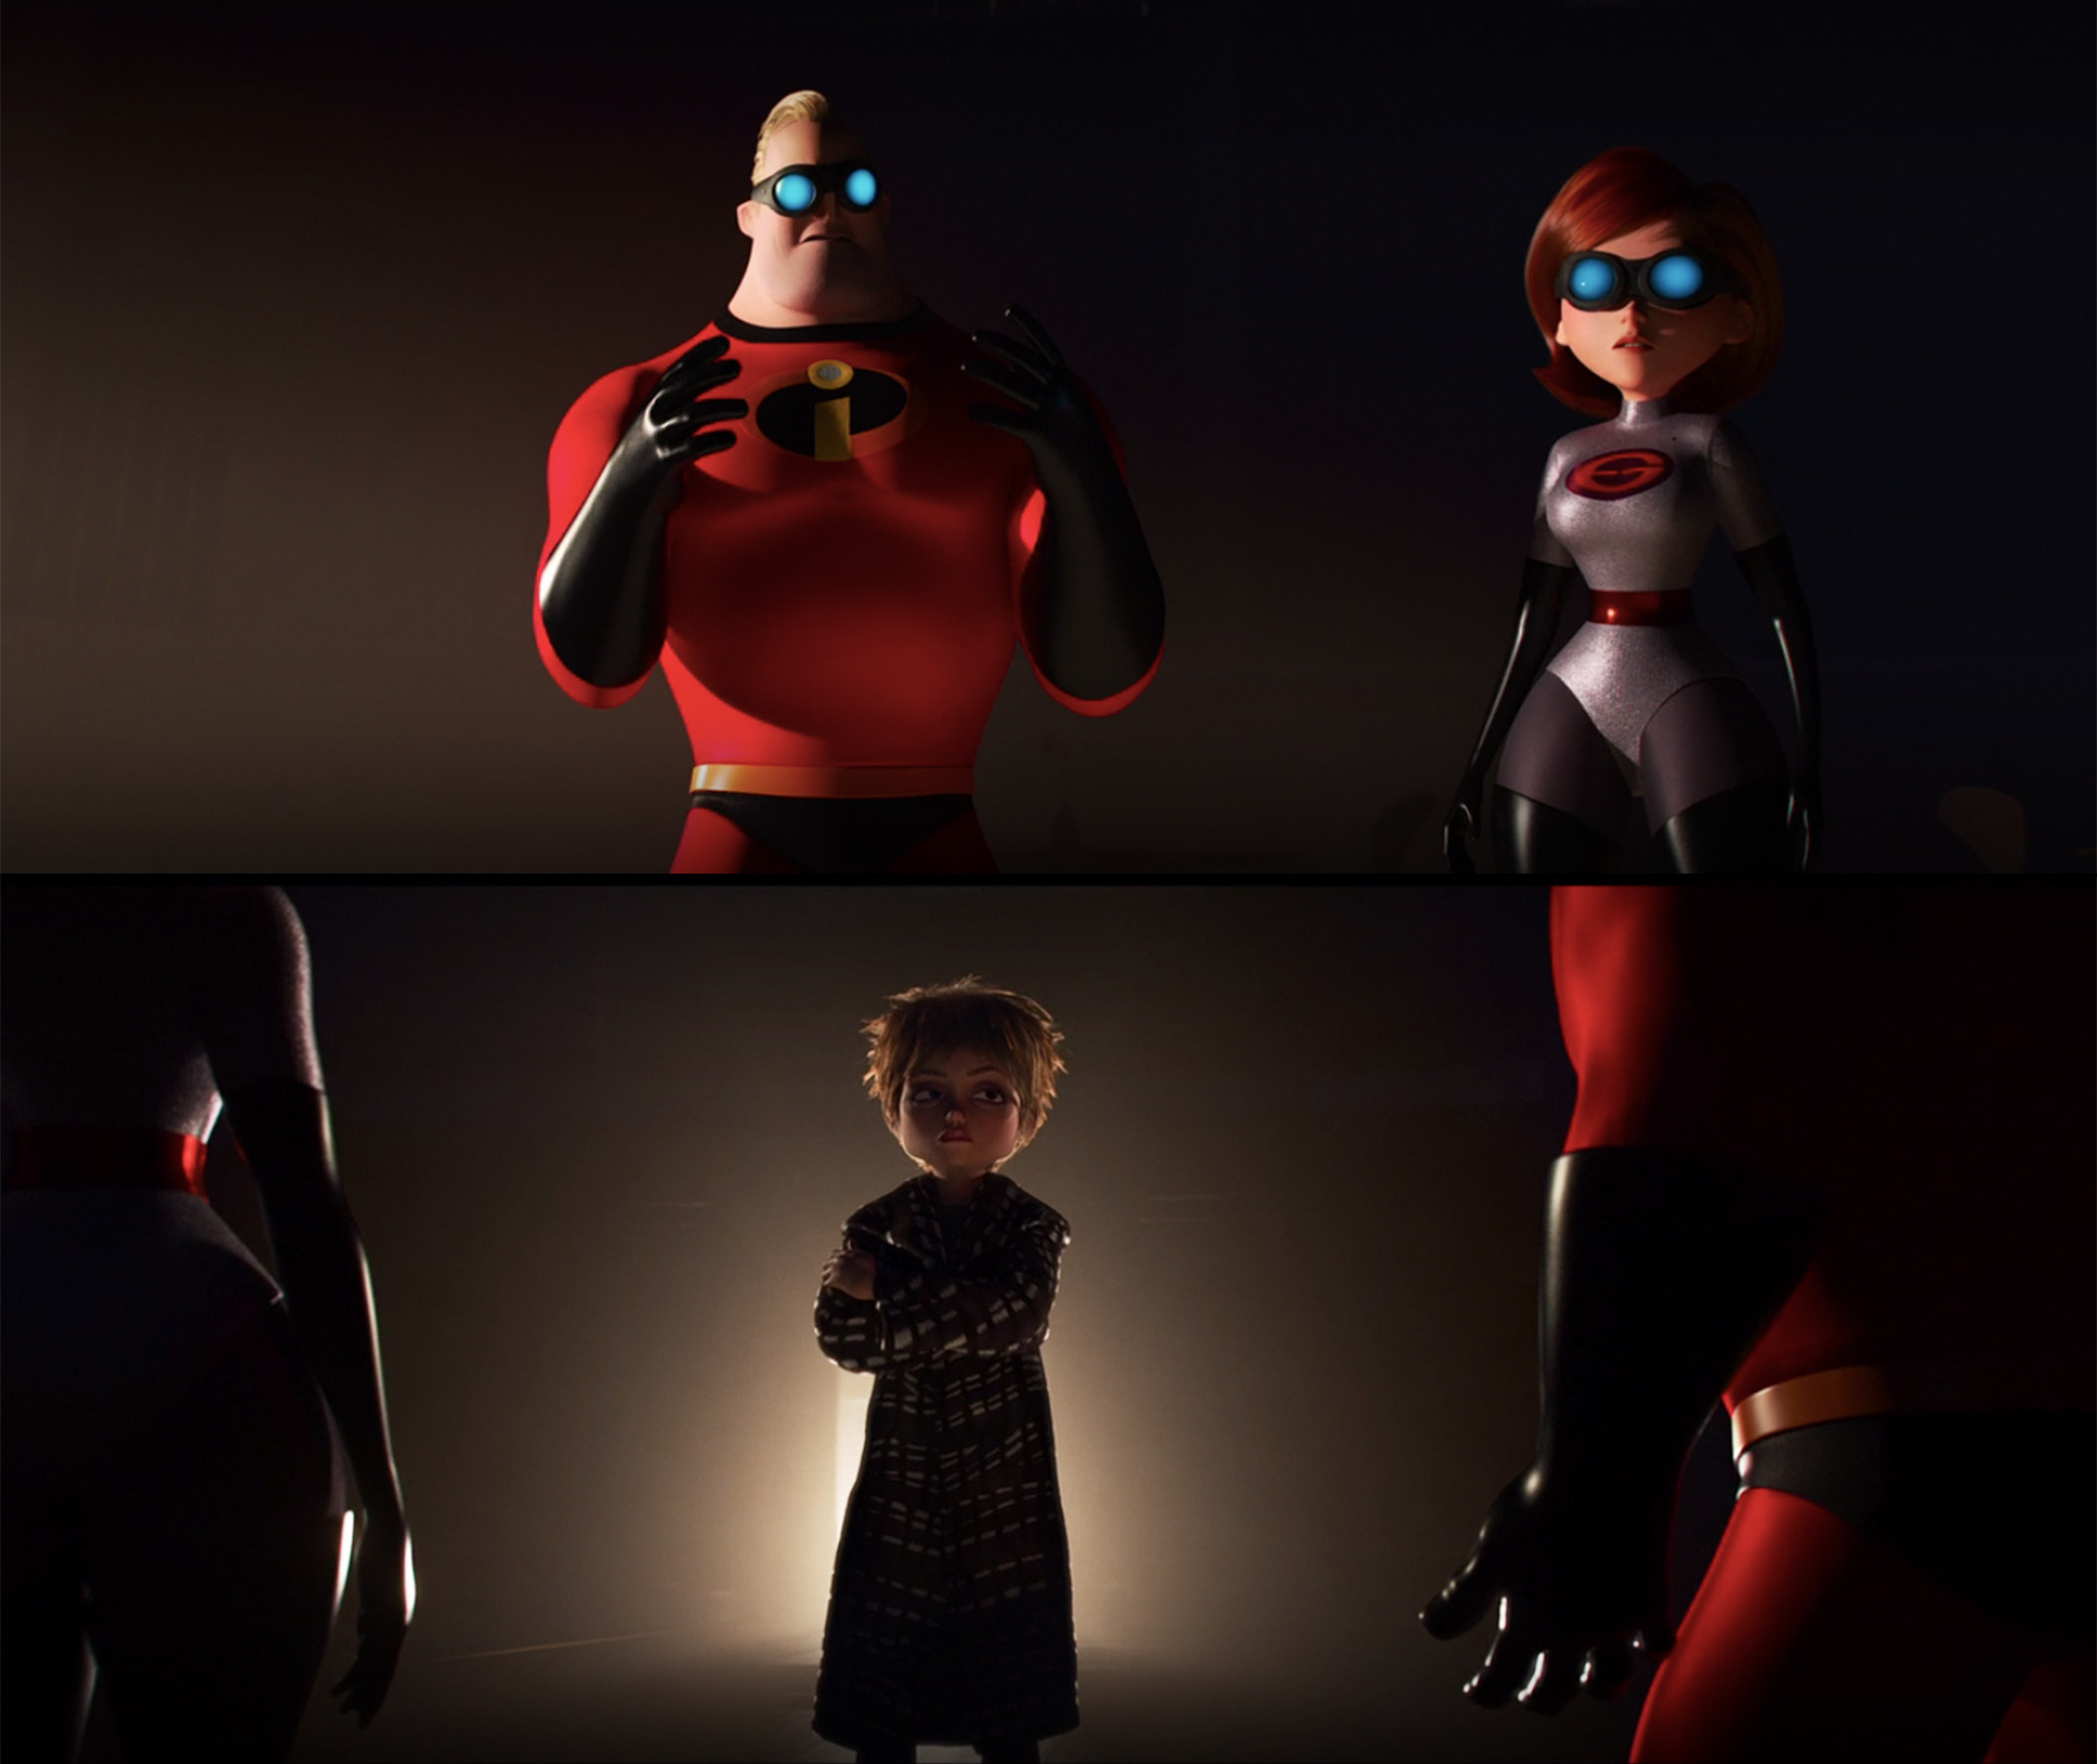 Evelyn reveals her identity to Elastigirl and Mr. Incredible